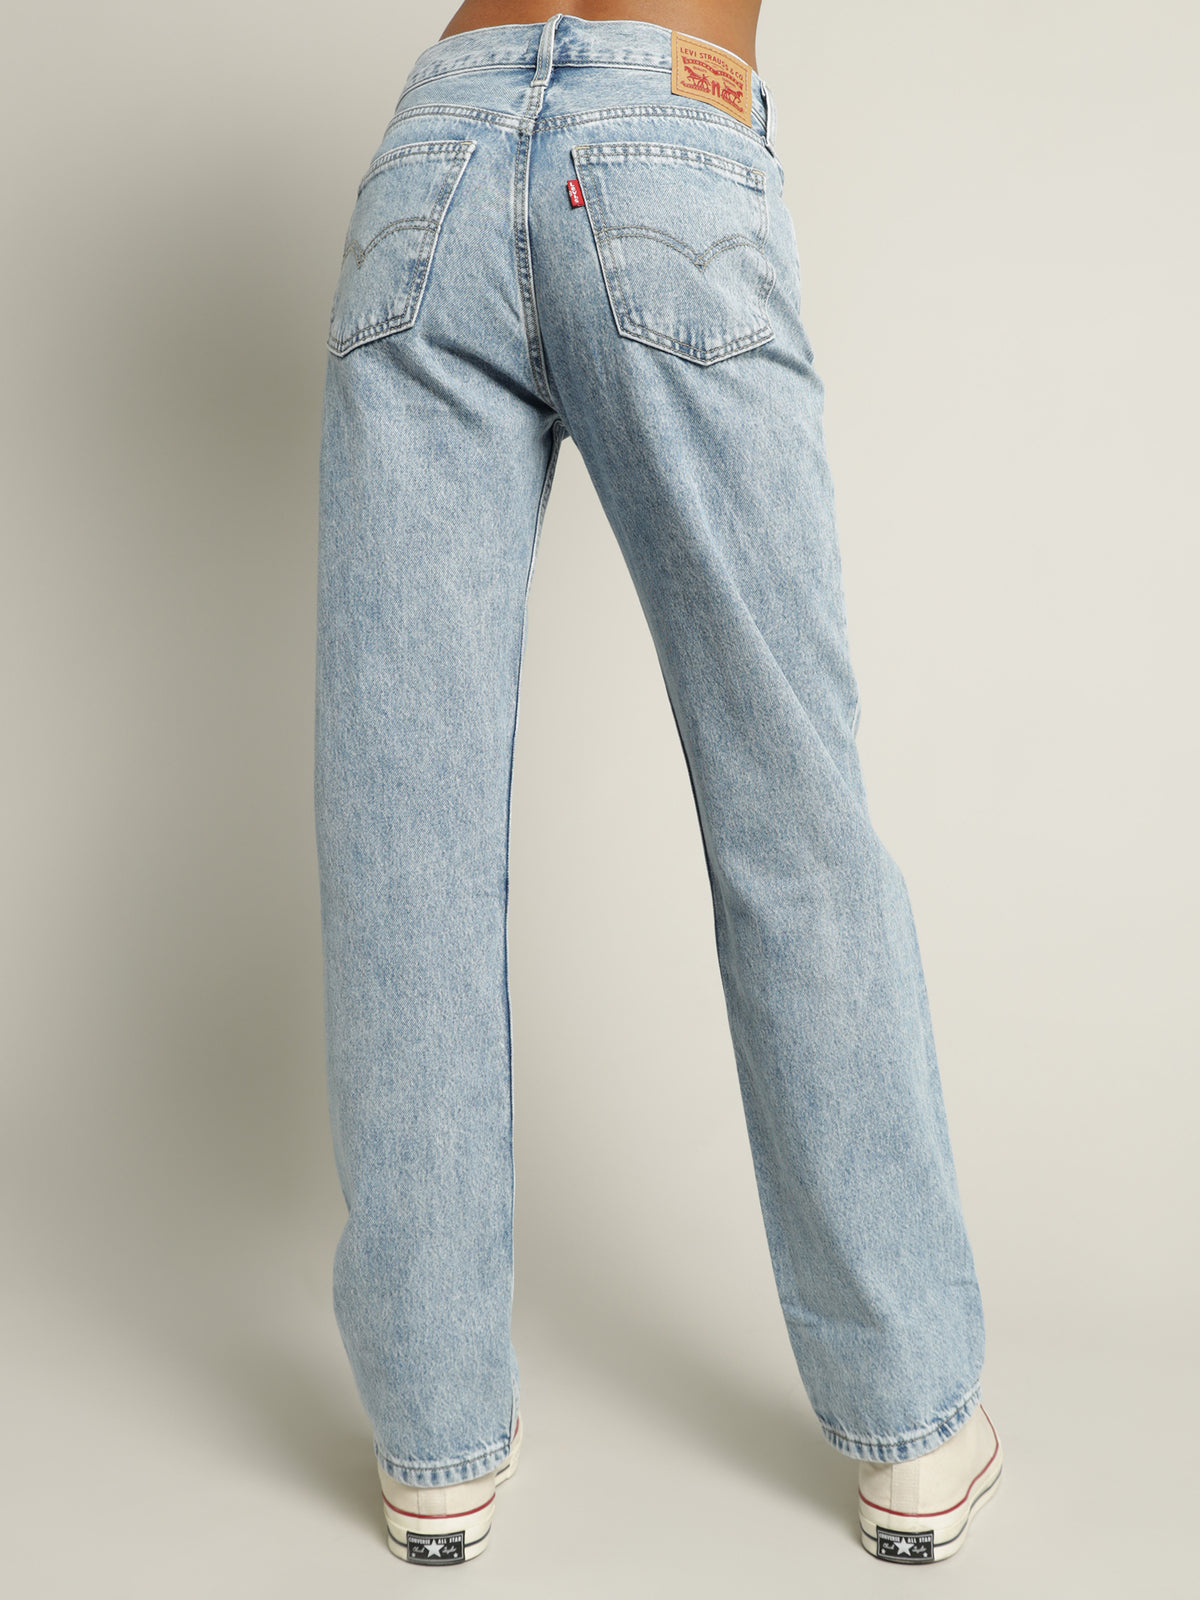 Low Pro Mid Rise Jeans in Charlie Glow Up